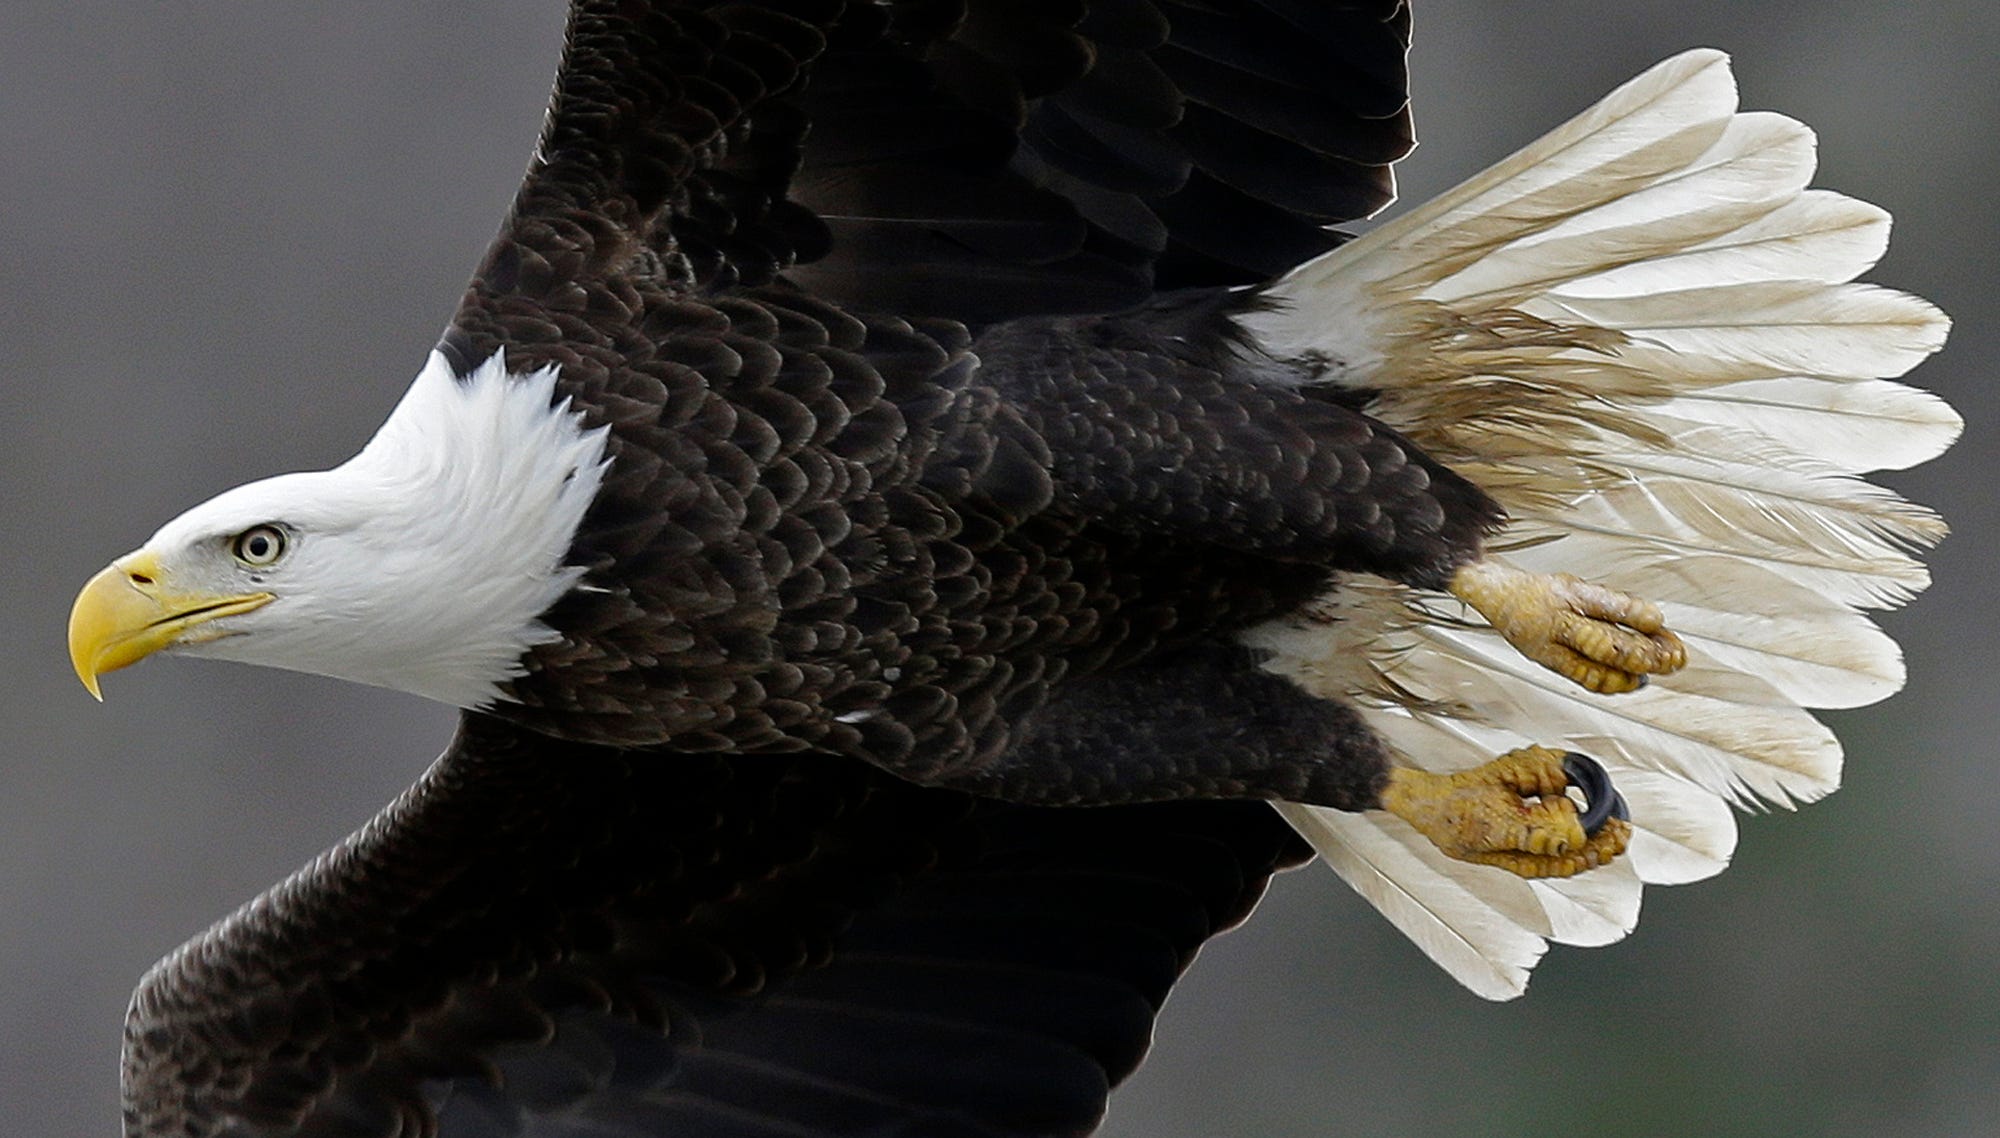 Bald Eagle Facts: Diet, Wingspan, Nests